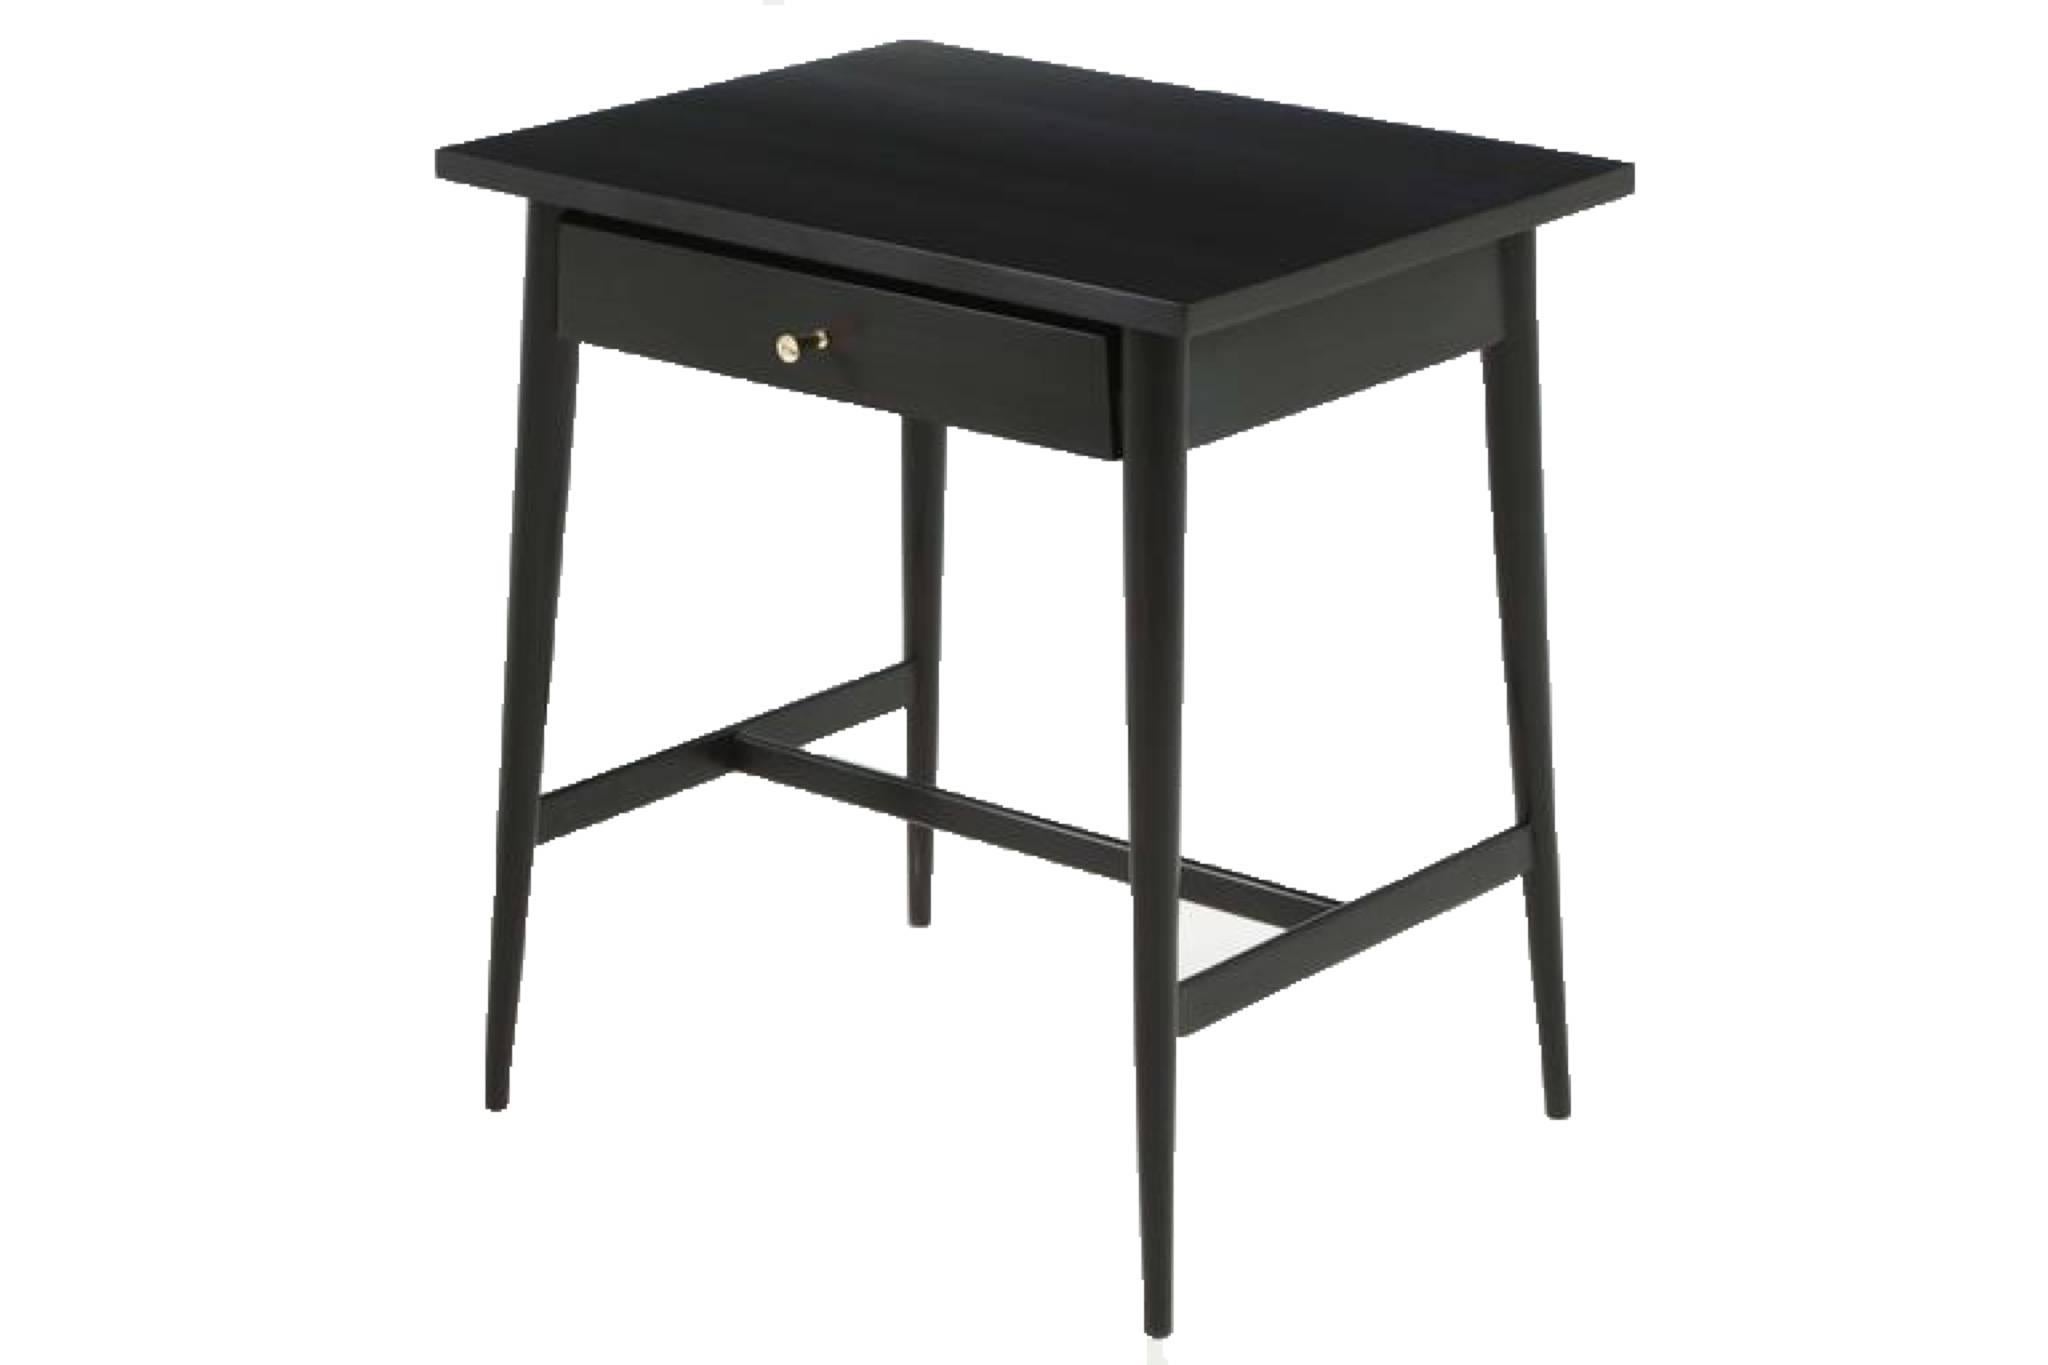 Paul McCobb Planner Group nightstands, circa 1955. Solid maple construction throughout, restored in a hand finished black lacquer with original brass conical drawer pull. Paul McCobb (1917-1969) is an American designer best known for the Planner